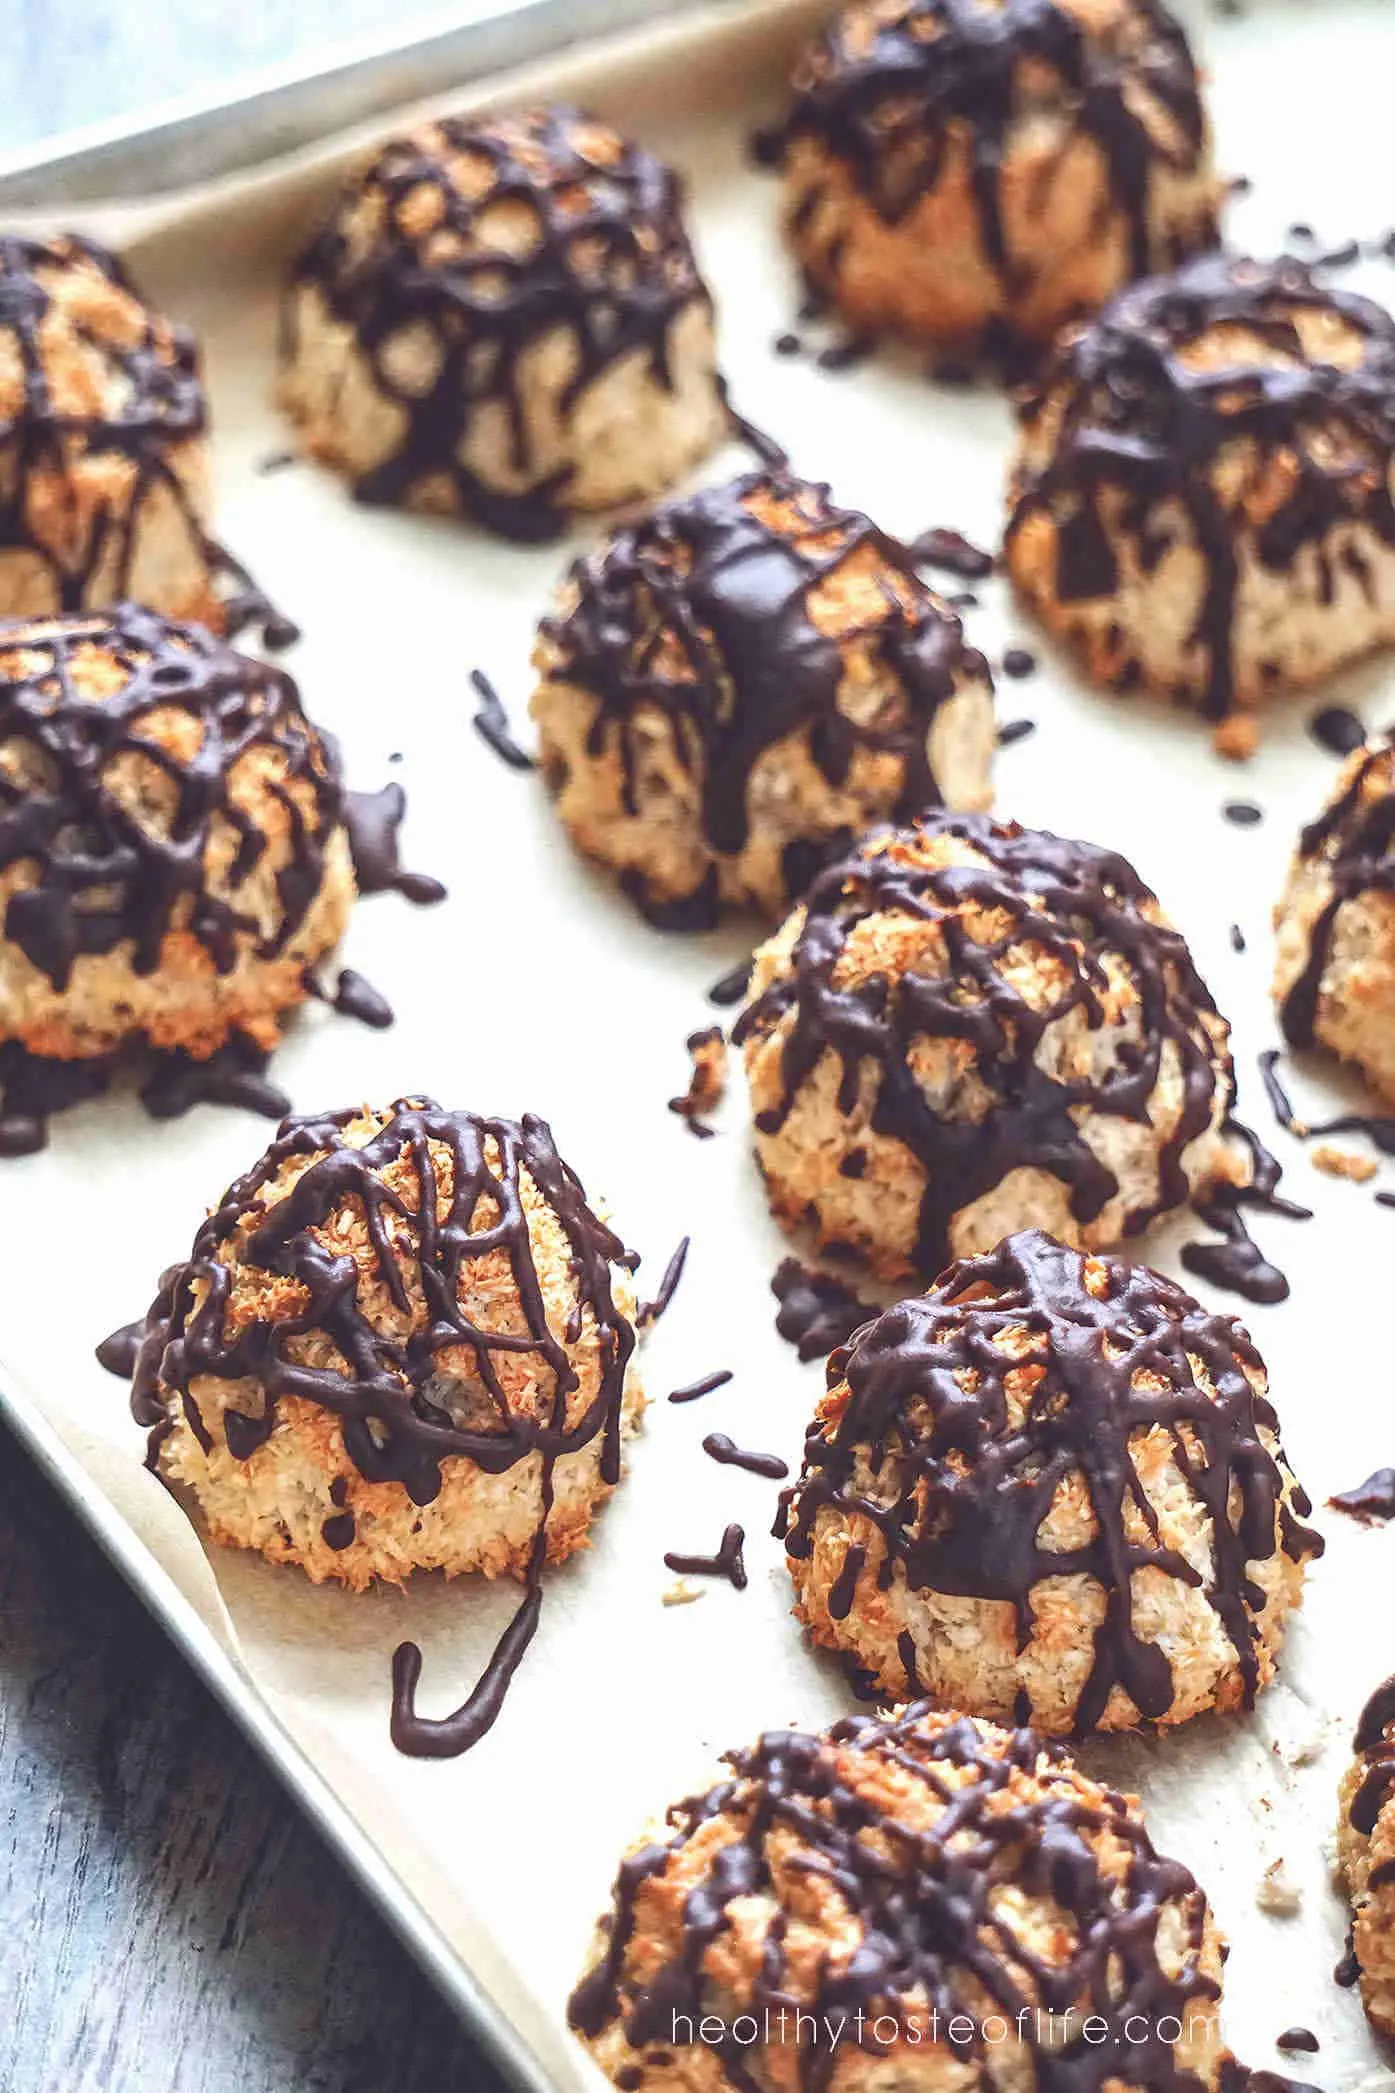 Overhead shots of baked dairy free gluten free coconut macaroon recipe without condensed milk, drizzled with chocolate.